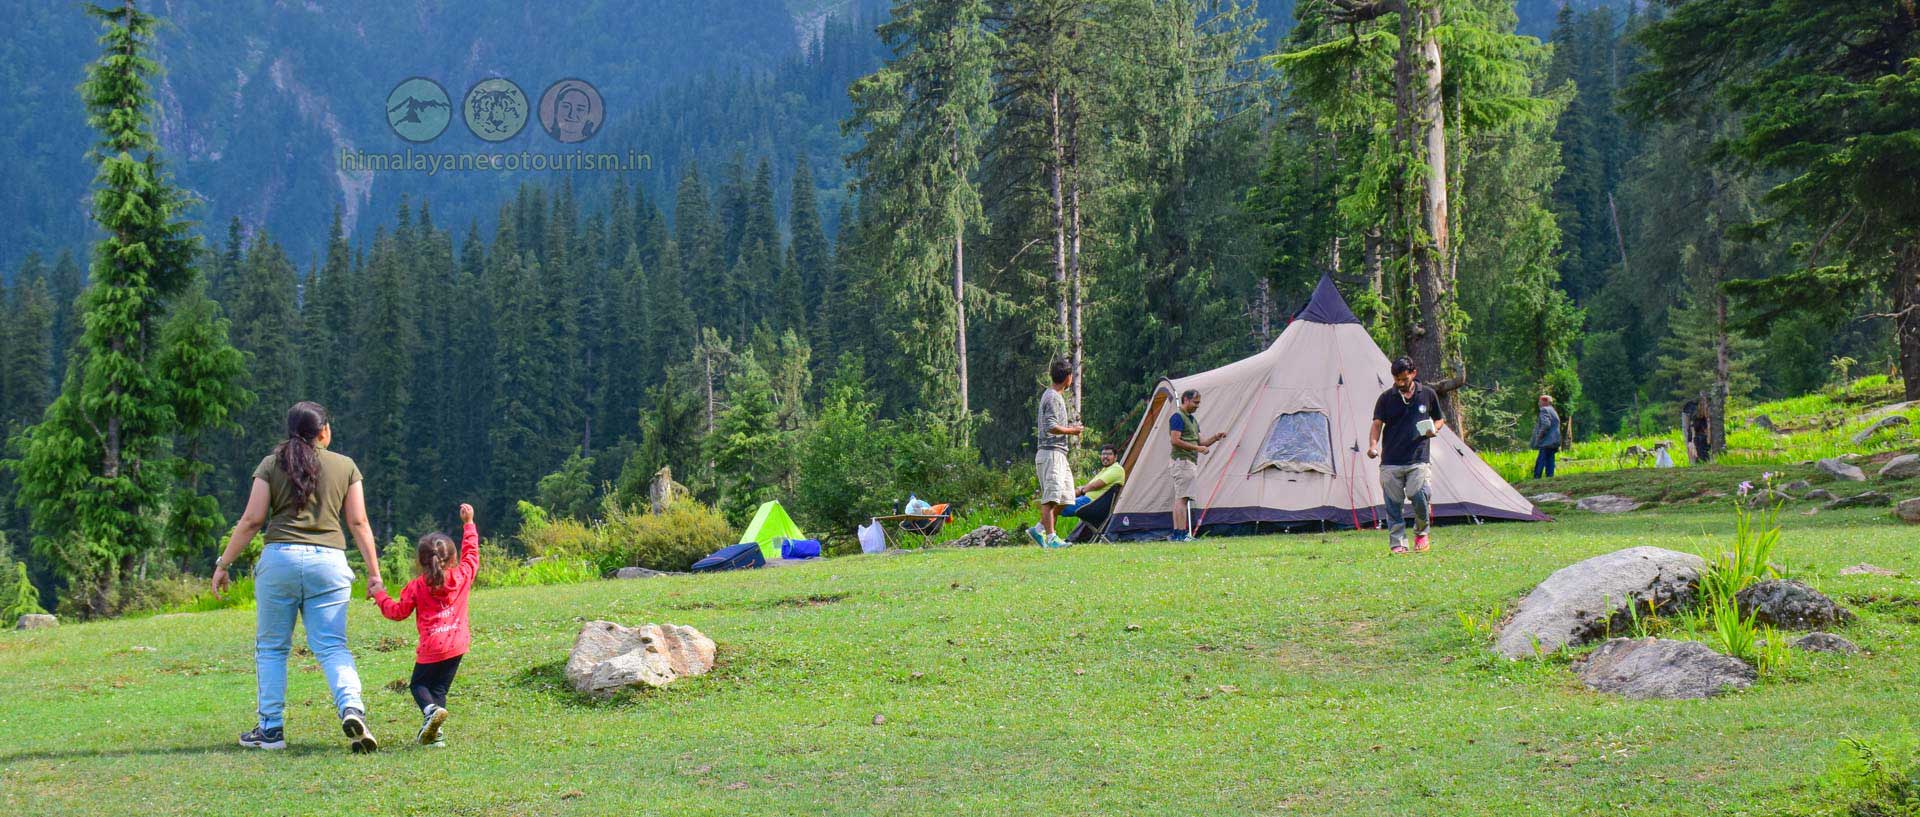 Easy Camping in the Tirthan Valley